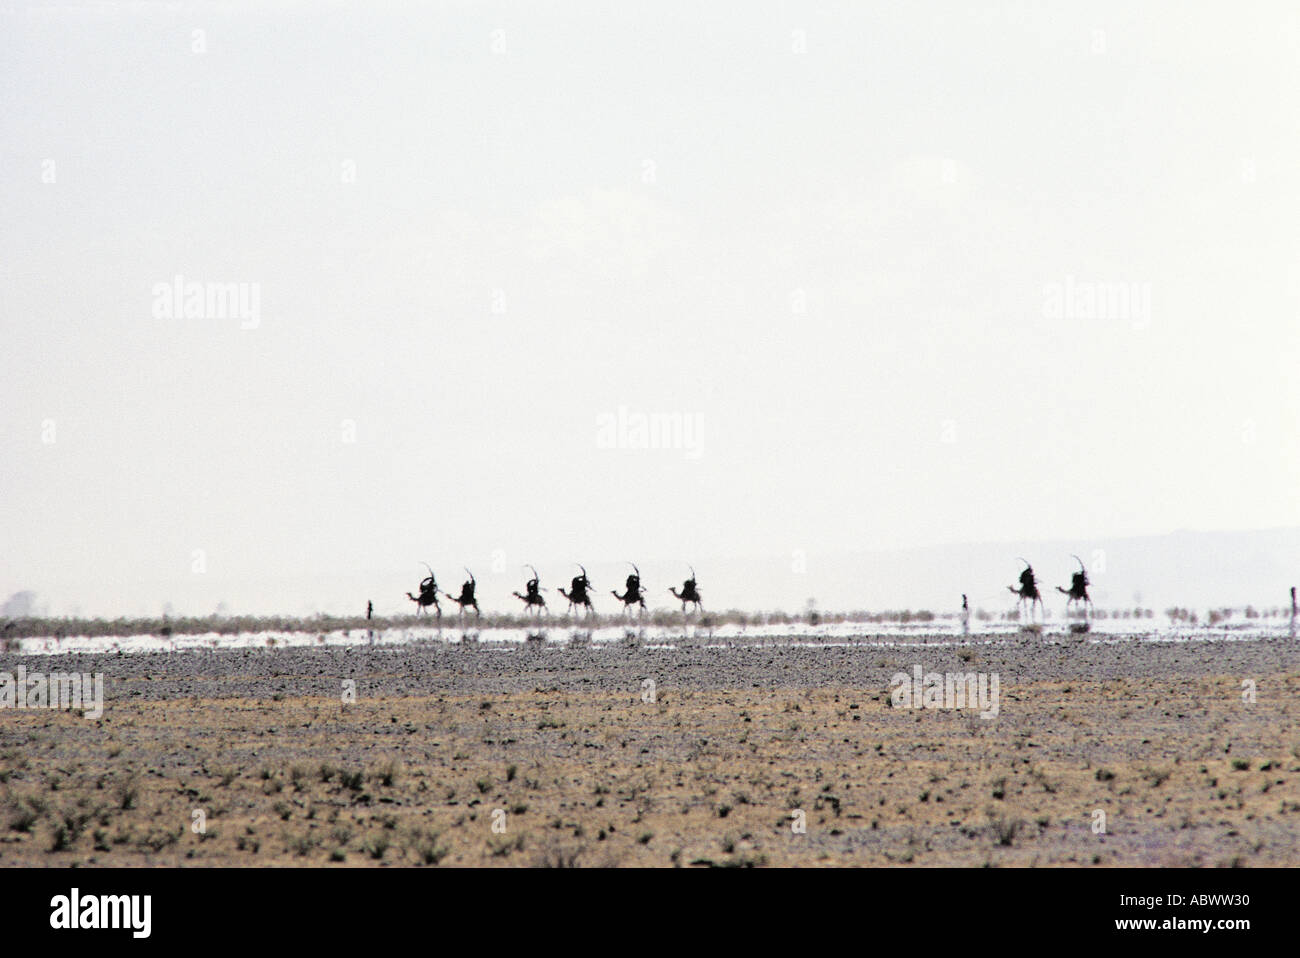 Gabbra people with their camels crossing the Charlbi Desert Stock Photo